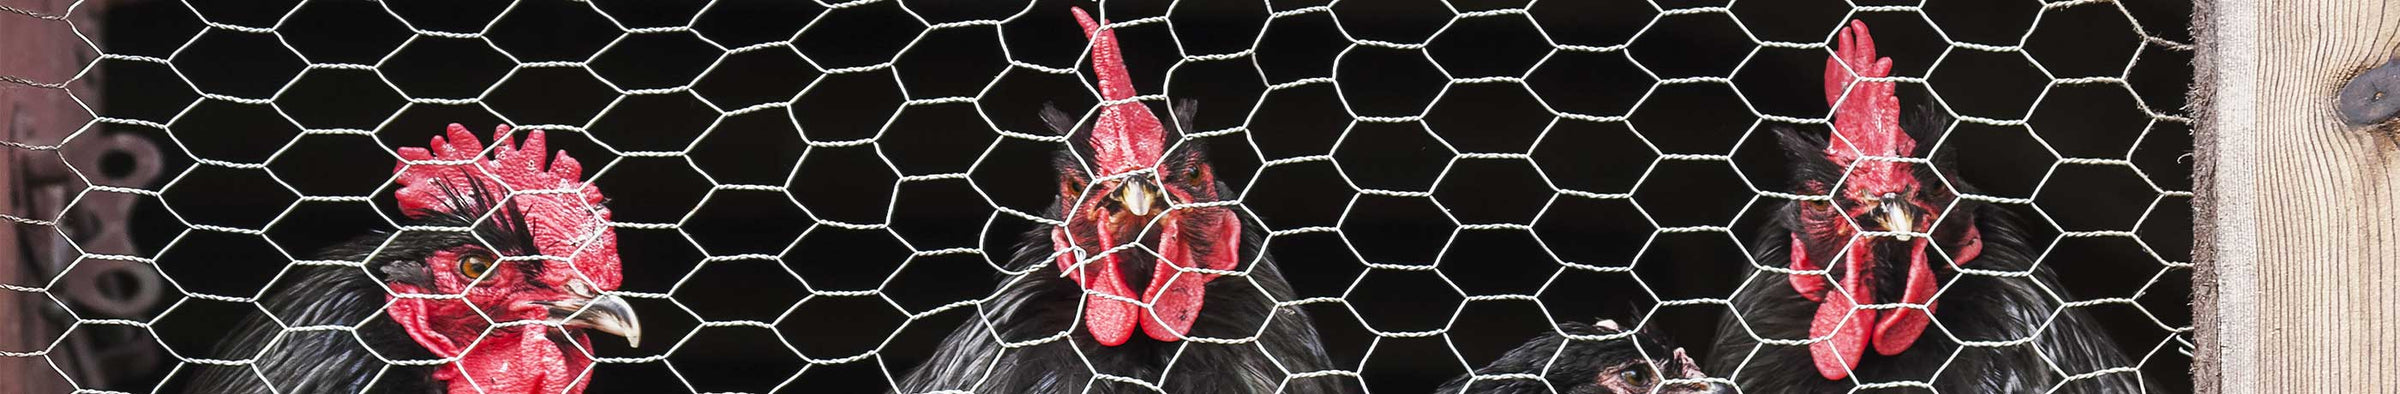 Poultry Netting